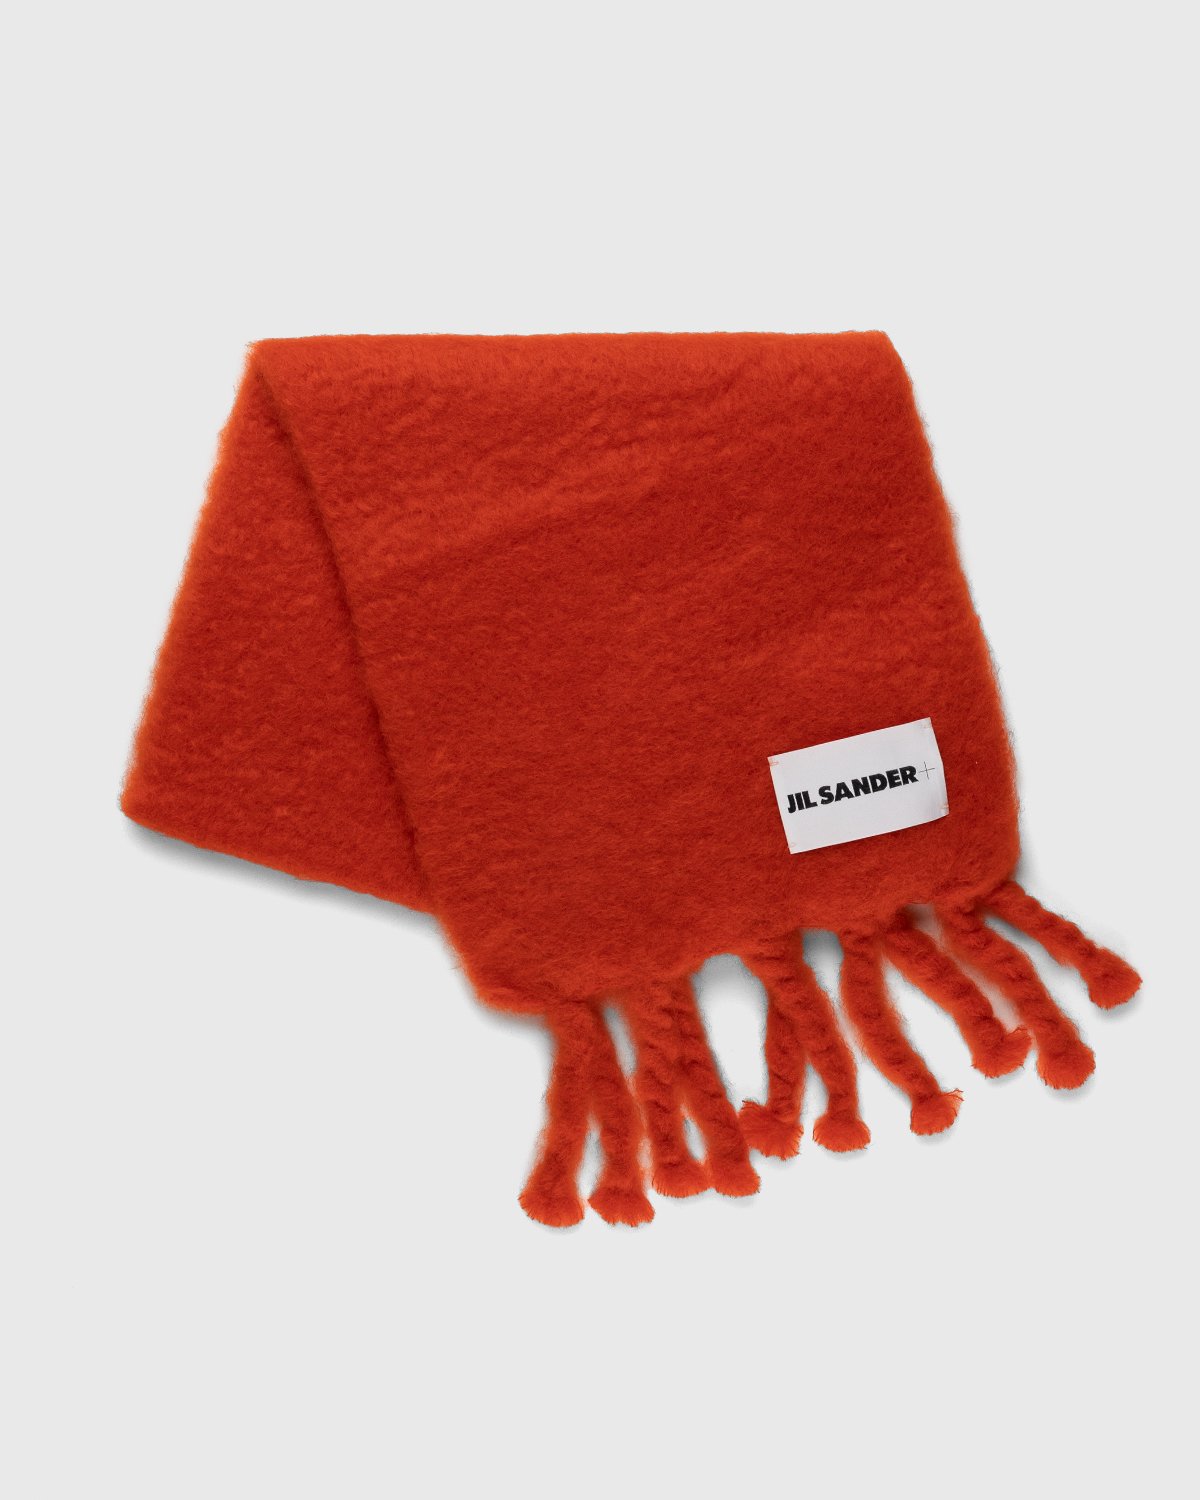 Jil Sander - Woven Scarf Red - Accessories - Red - Image 1